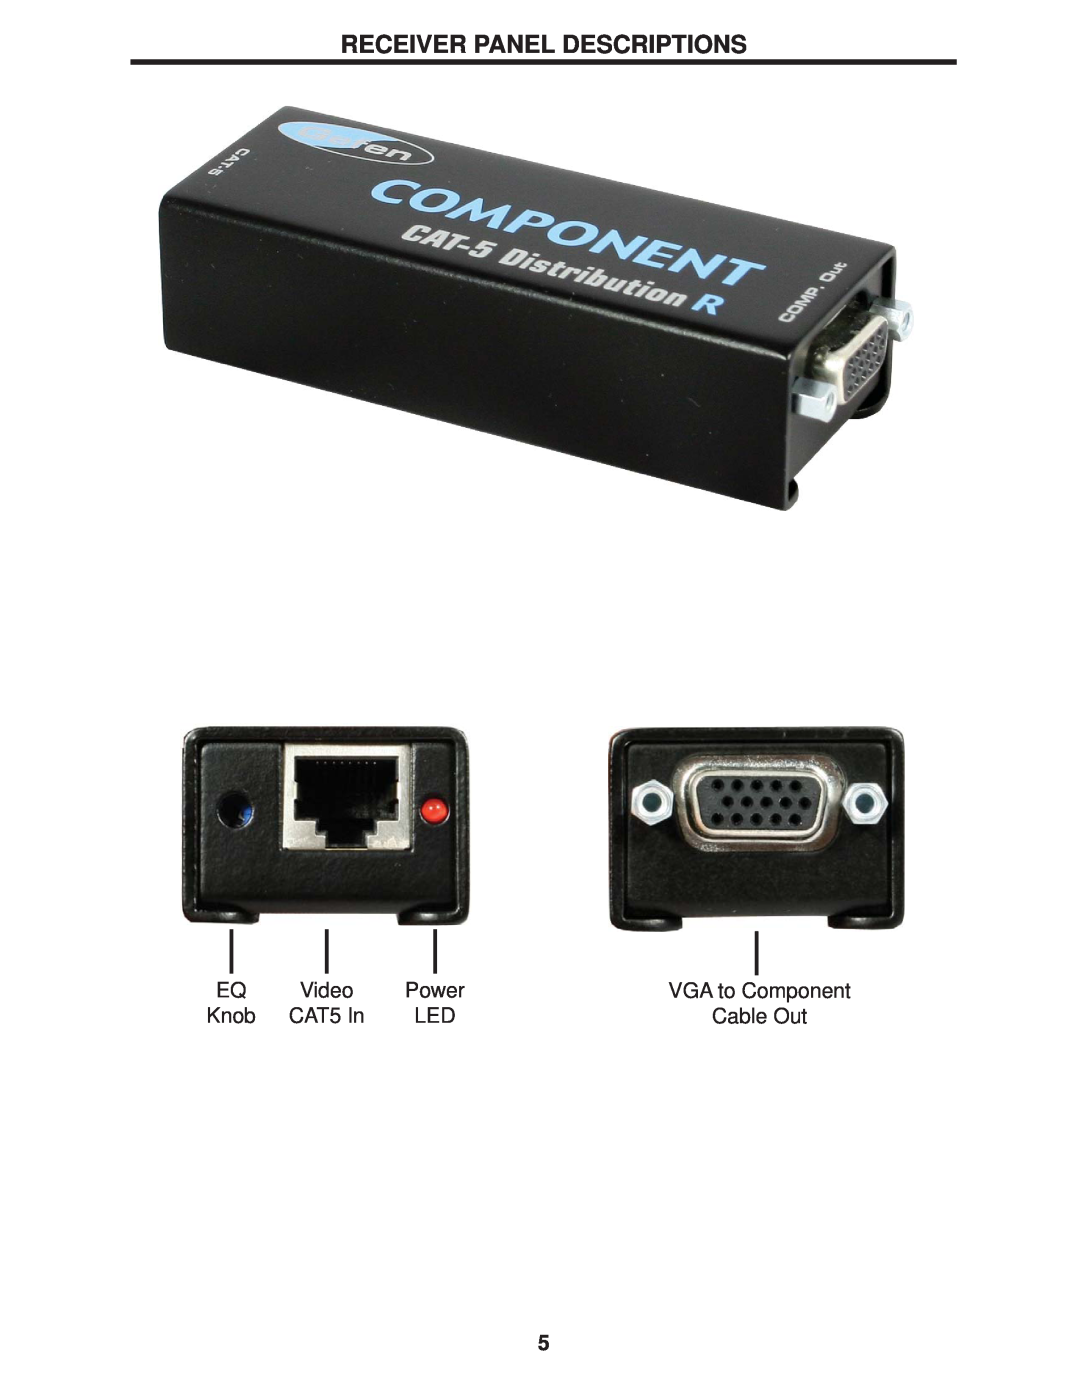 Gefen CAT-5 DA user manual Receiver Panel Descriptions, Power, VGA to Component, Knob, CAT5 In, Cable Out, Video 